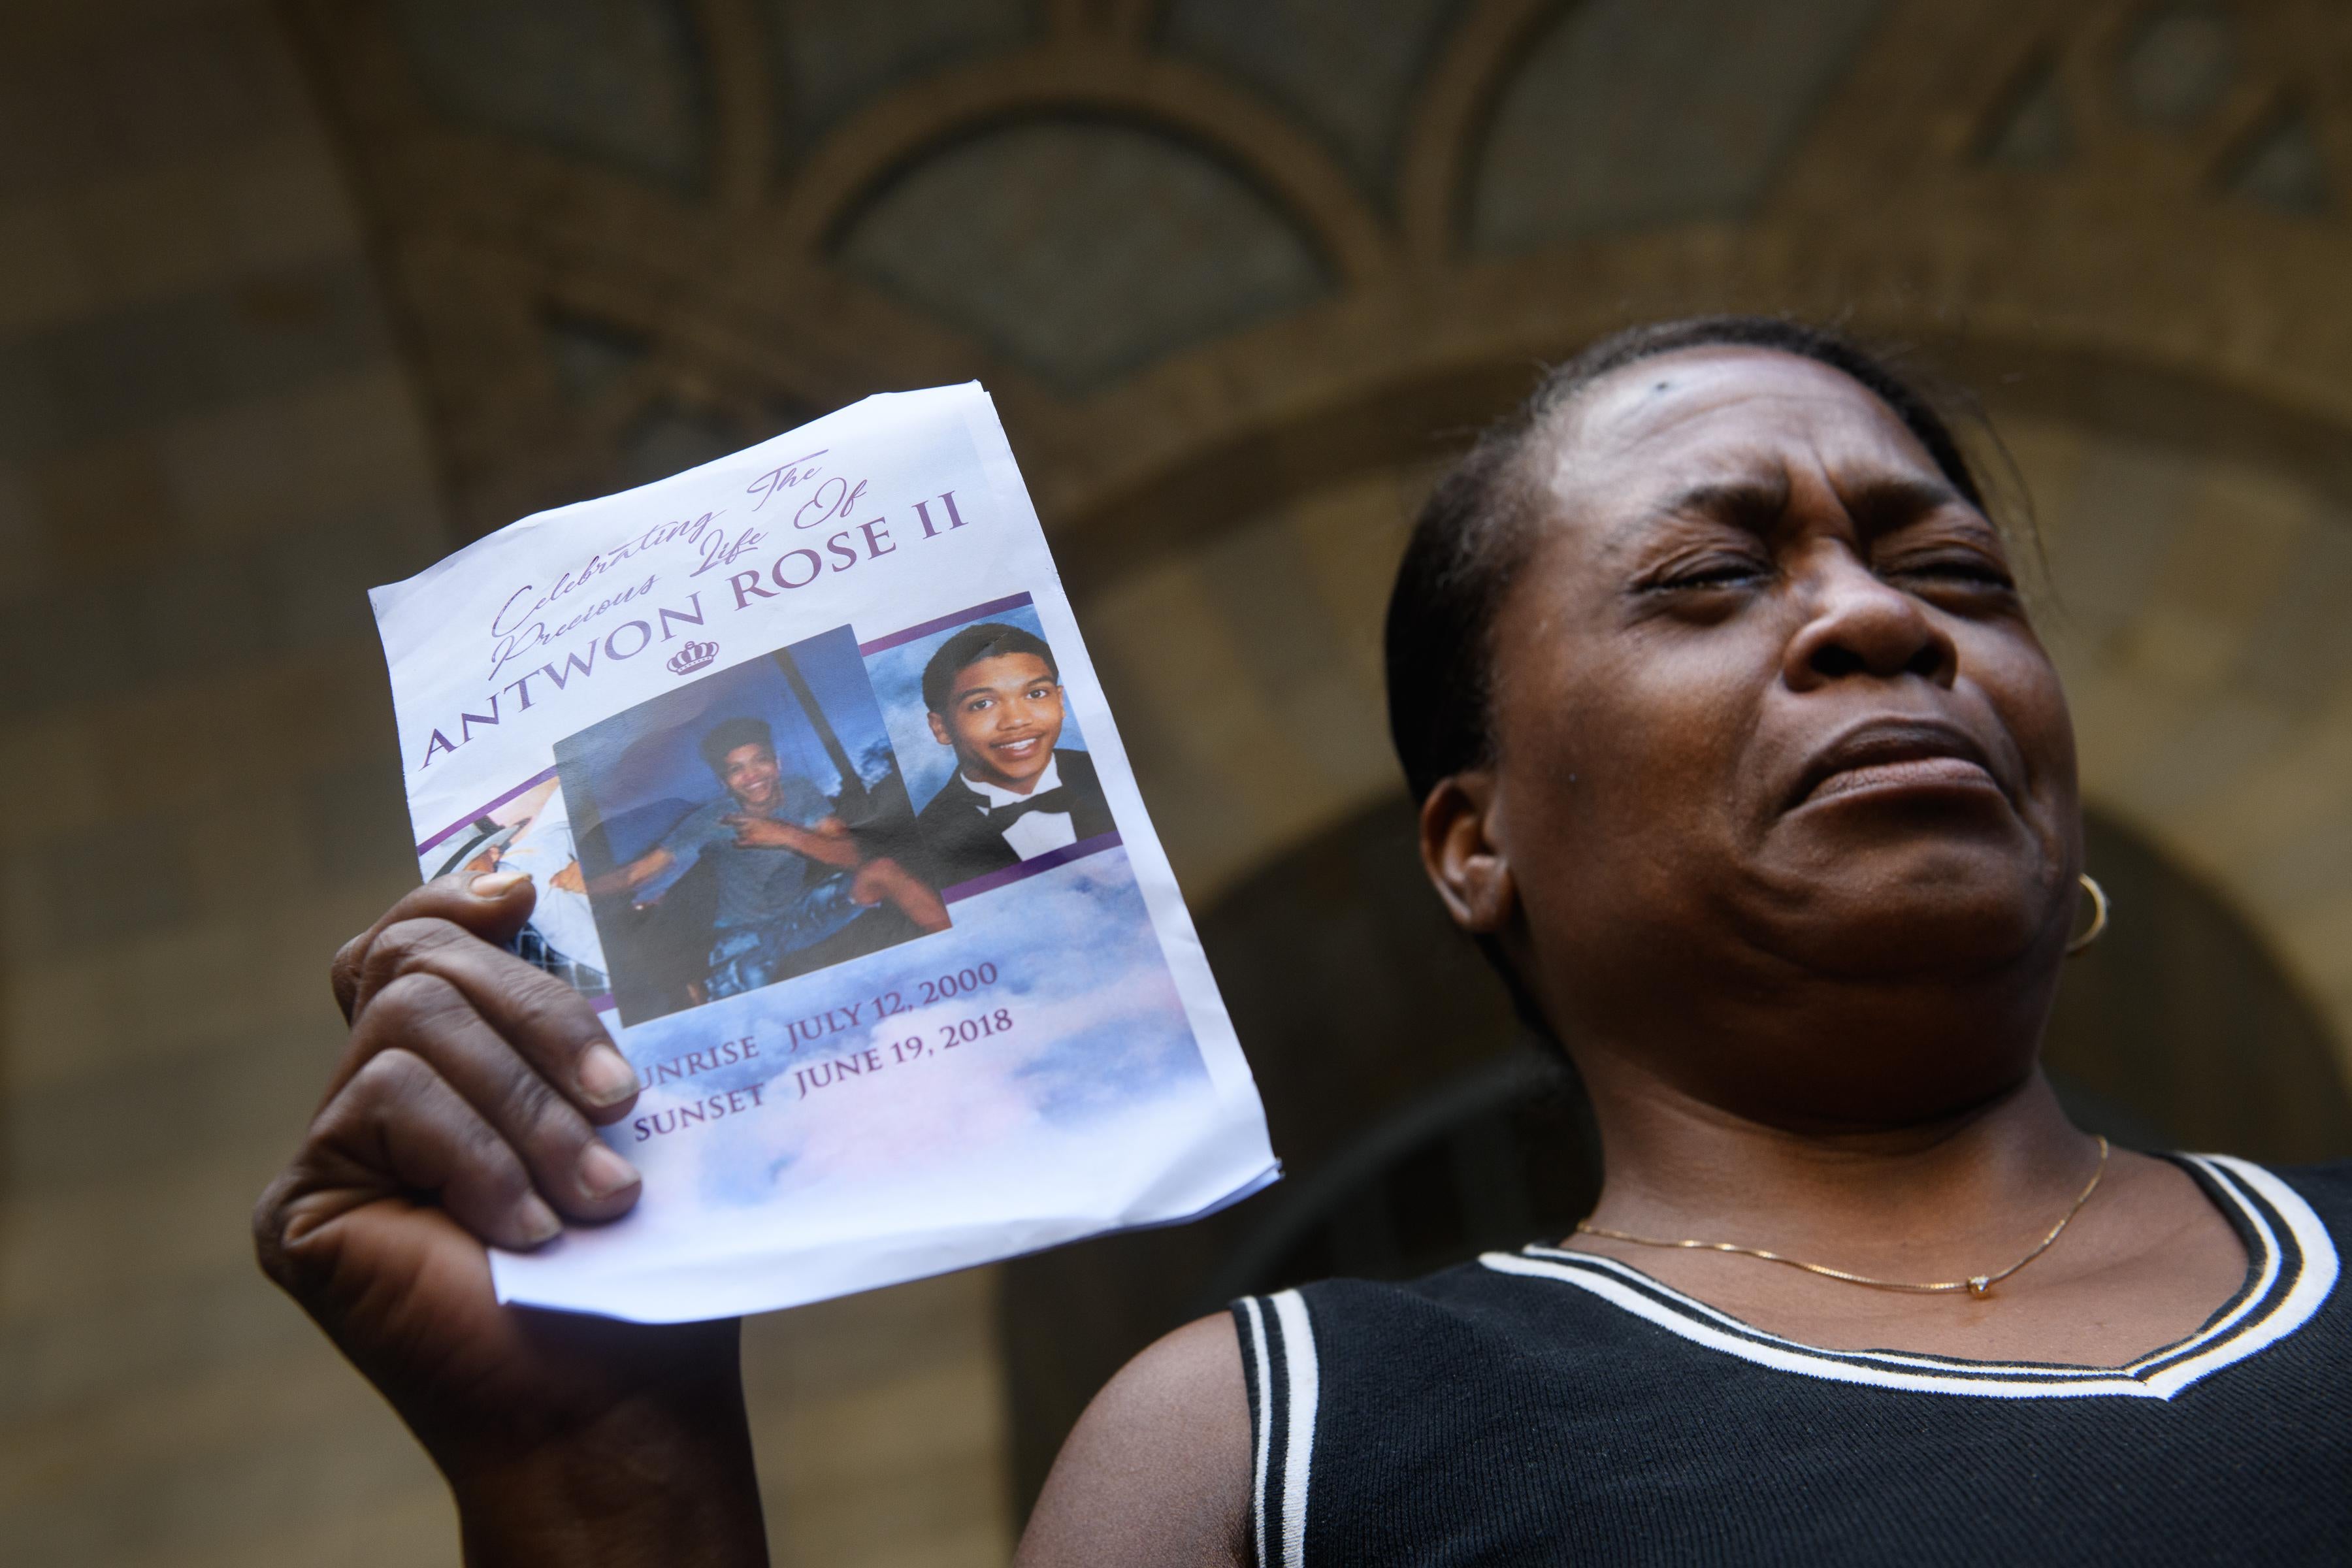 Carmen Ashley, Antwon Rose's great aunt, cries as she holds the memorial card from Rose's funeral during a protest.